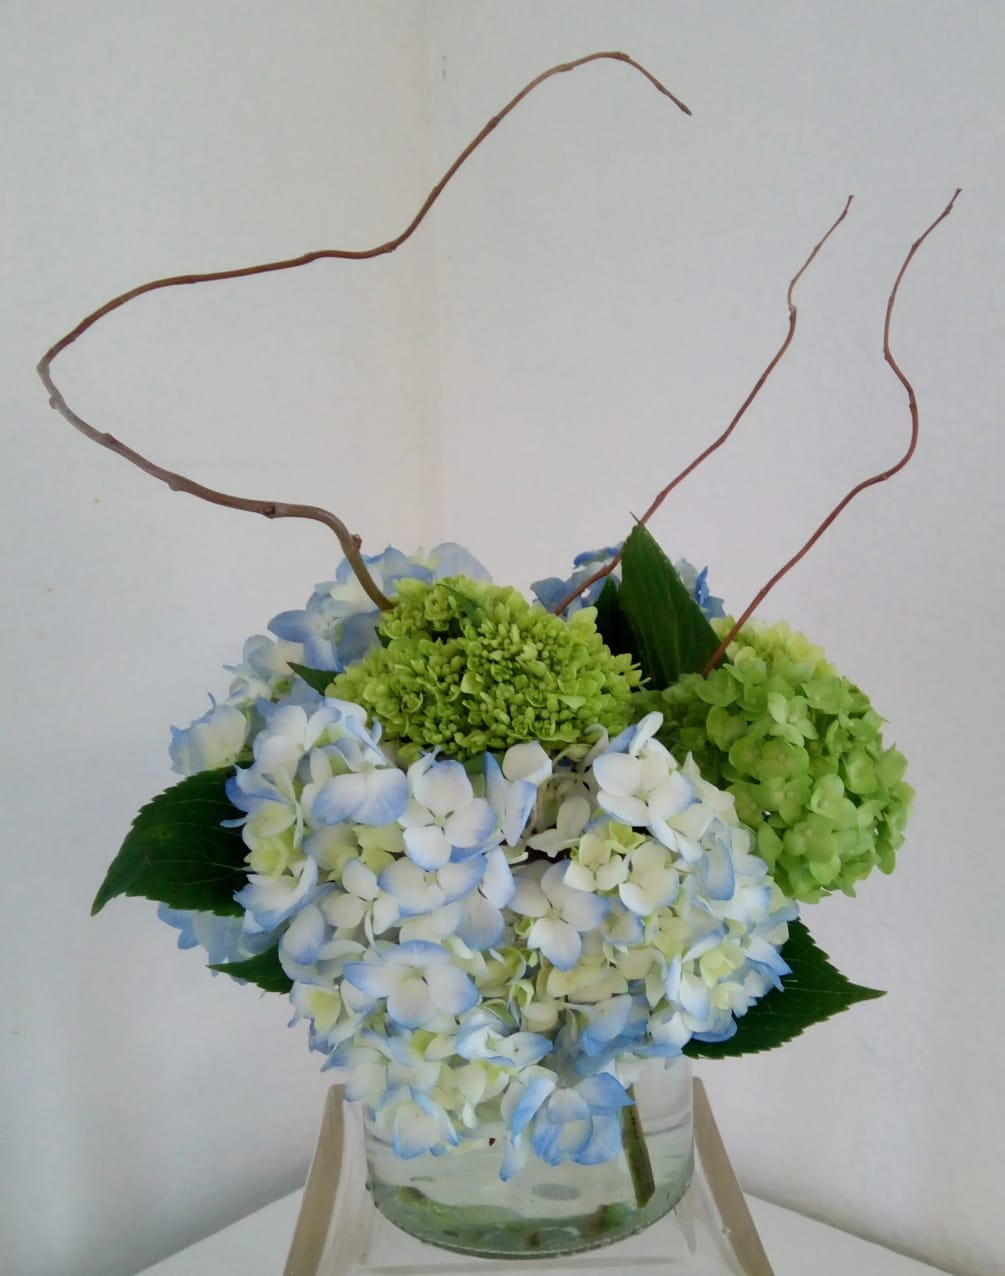 Mix of green and blue hydrangea in a wide cylinder vase